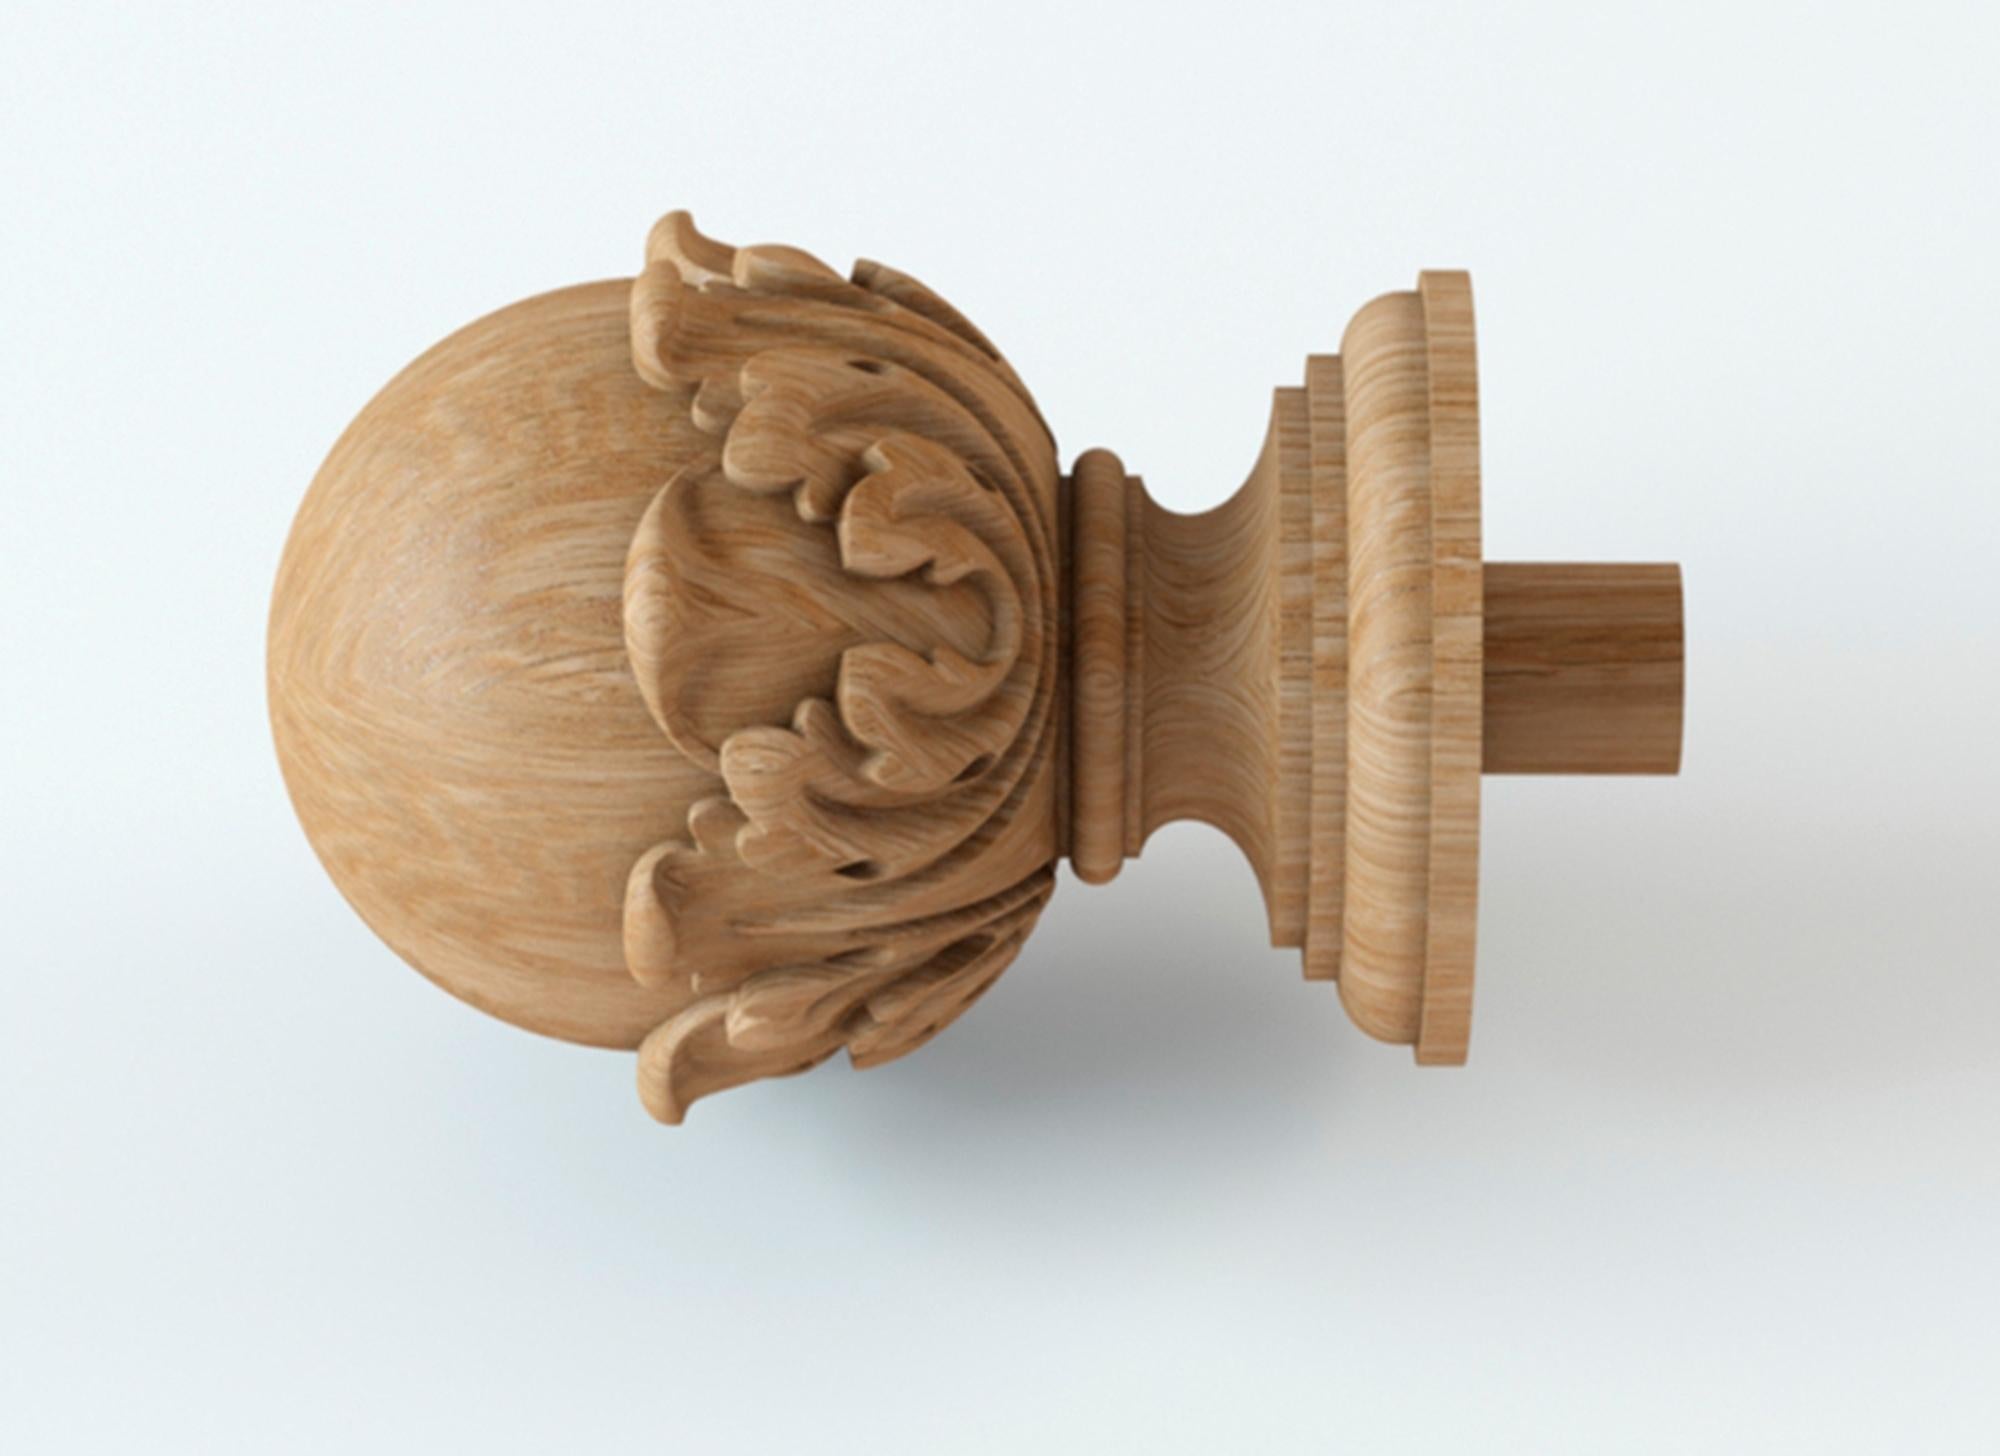 Unfinished high quality carved finial from oak or beech of your choice.

>> SKU: L-007

>> Dimensions (A x B x C x e):

1) 3.78